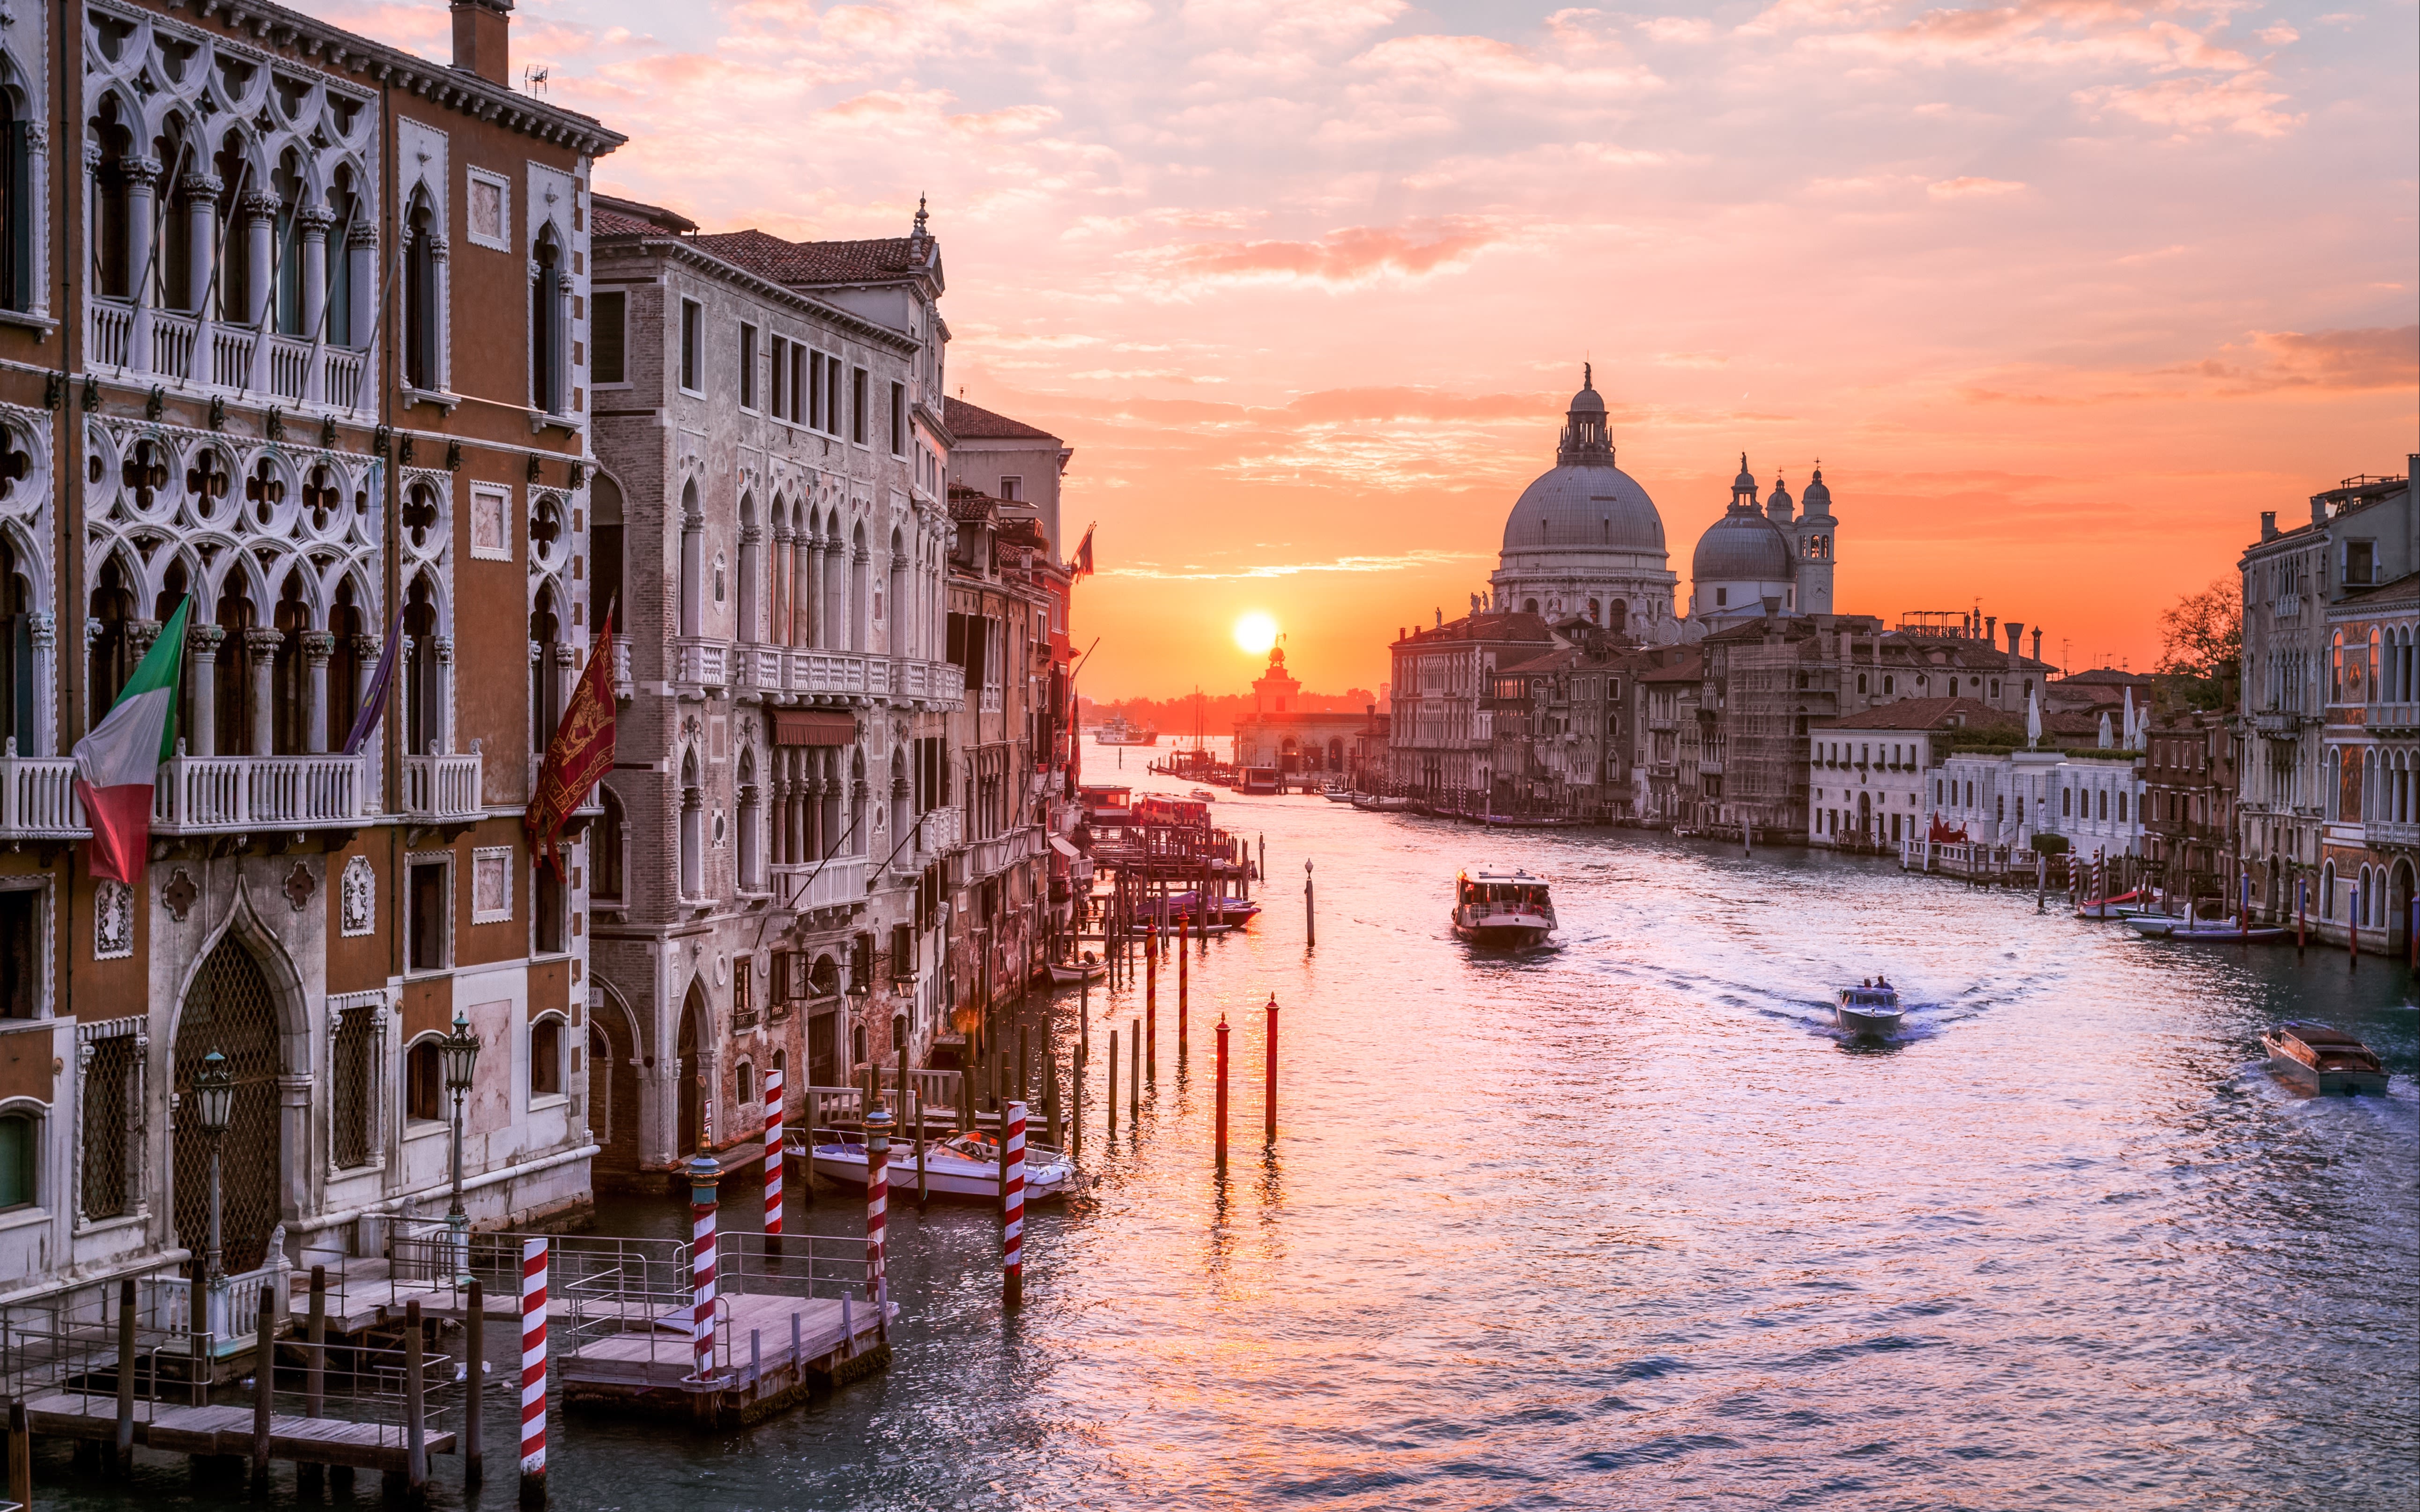 Image of a canal in Venice at sunset. 